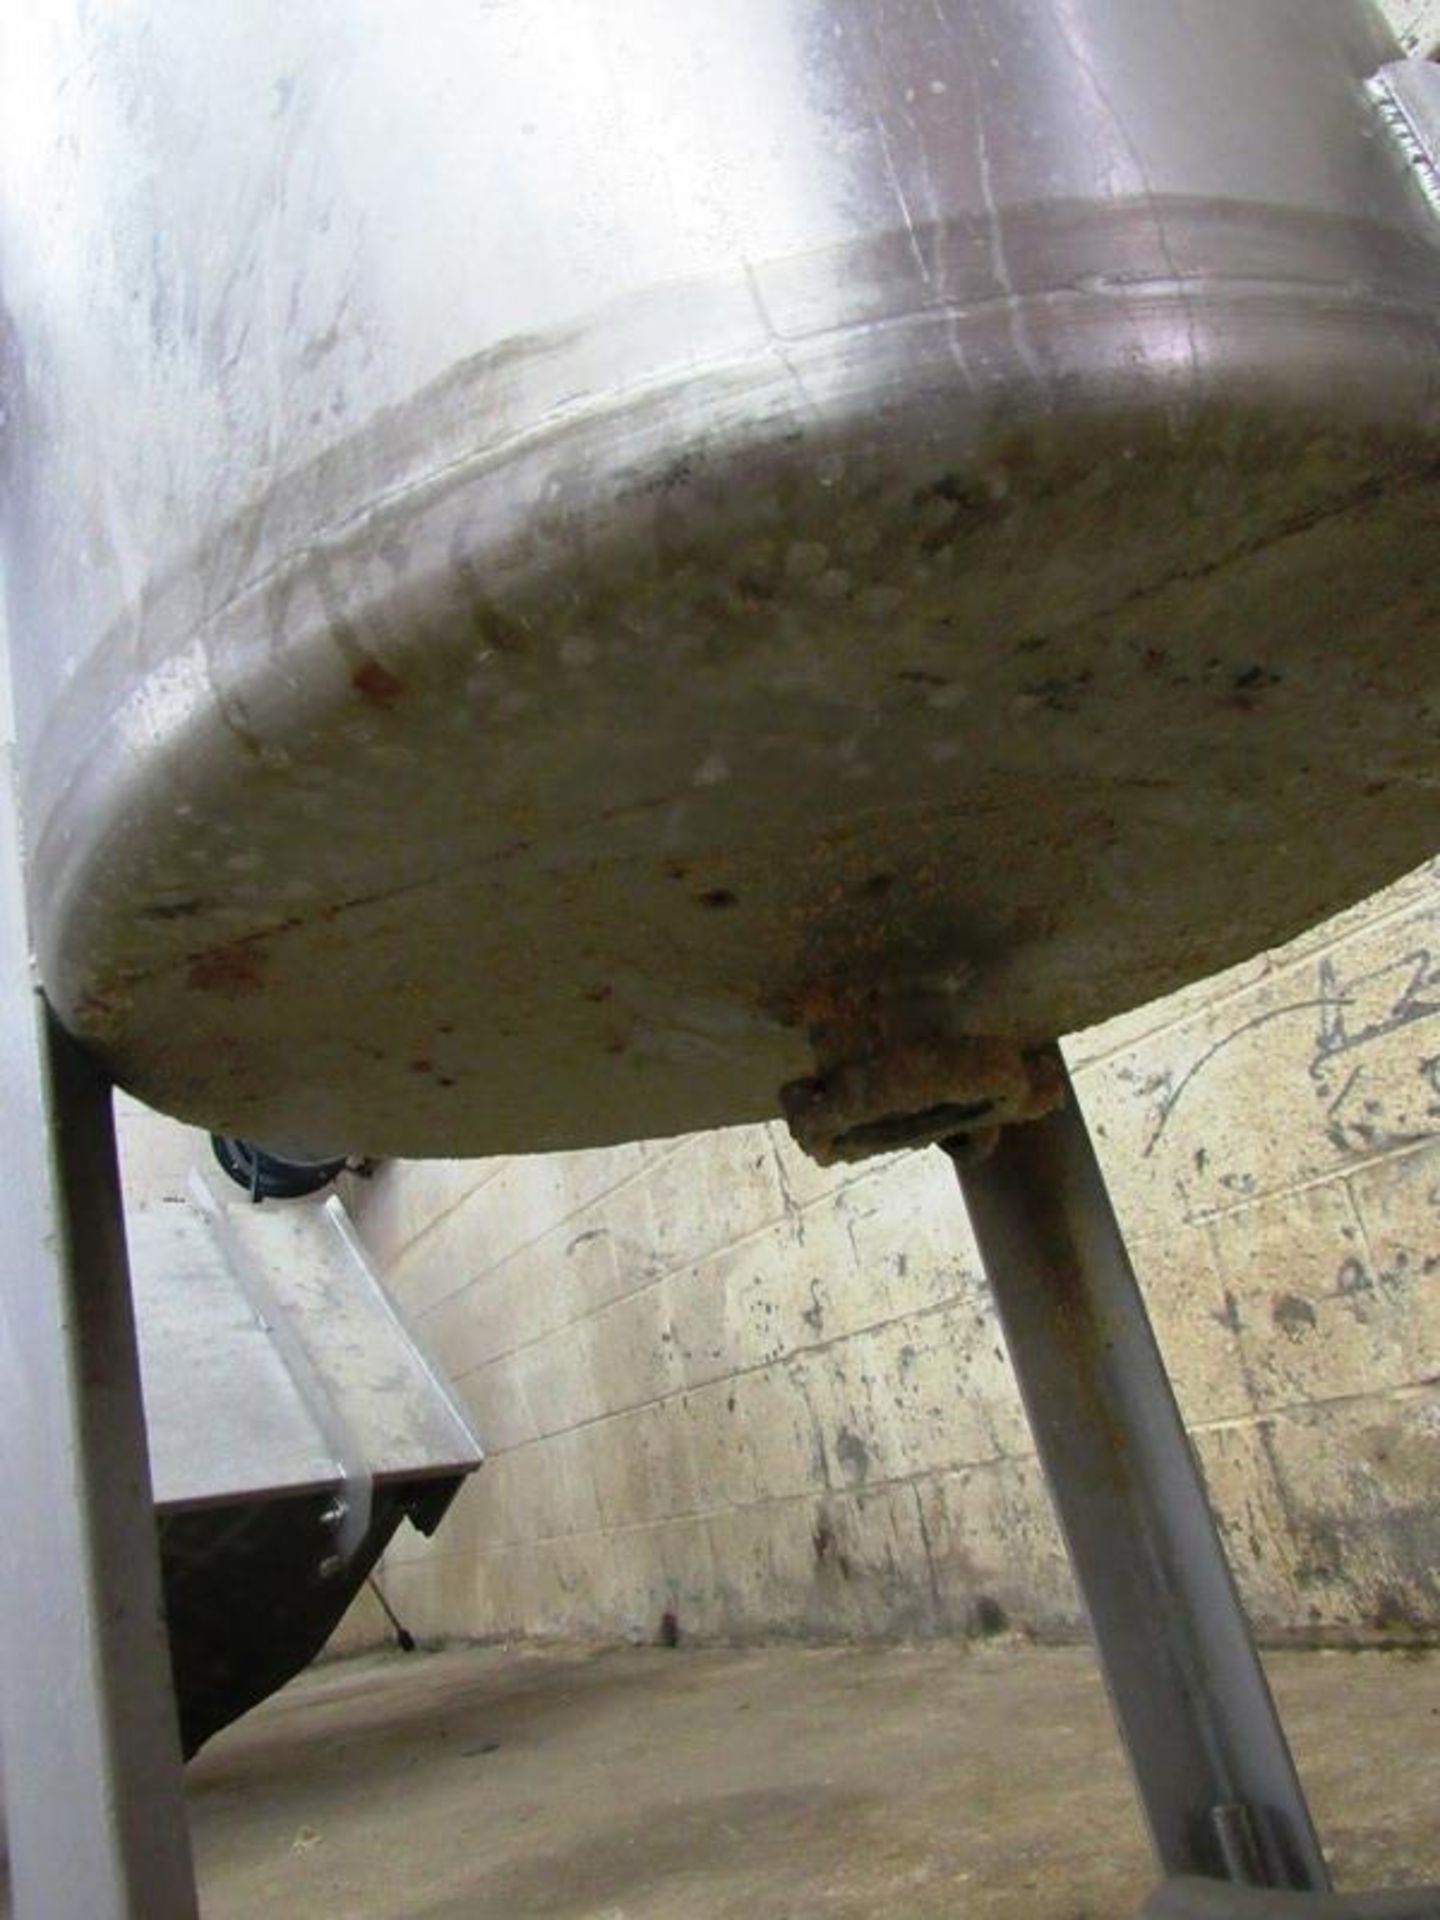 Stainless Steel Process Tank, 20" Dia. X 24" Deep, (42") T, 2" bottom outlet - Image 3 of 3